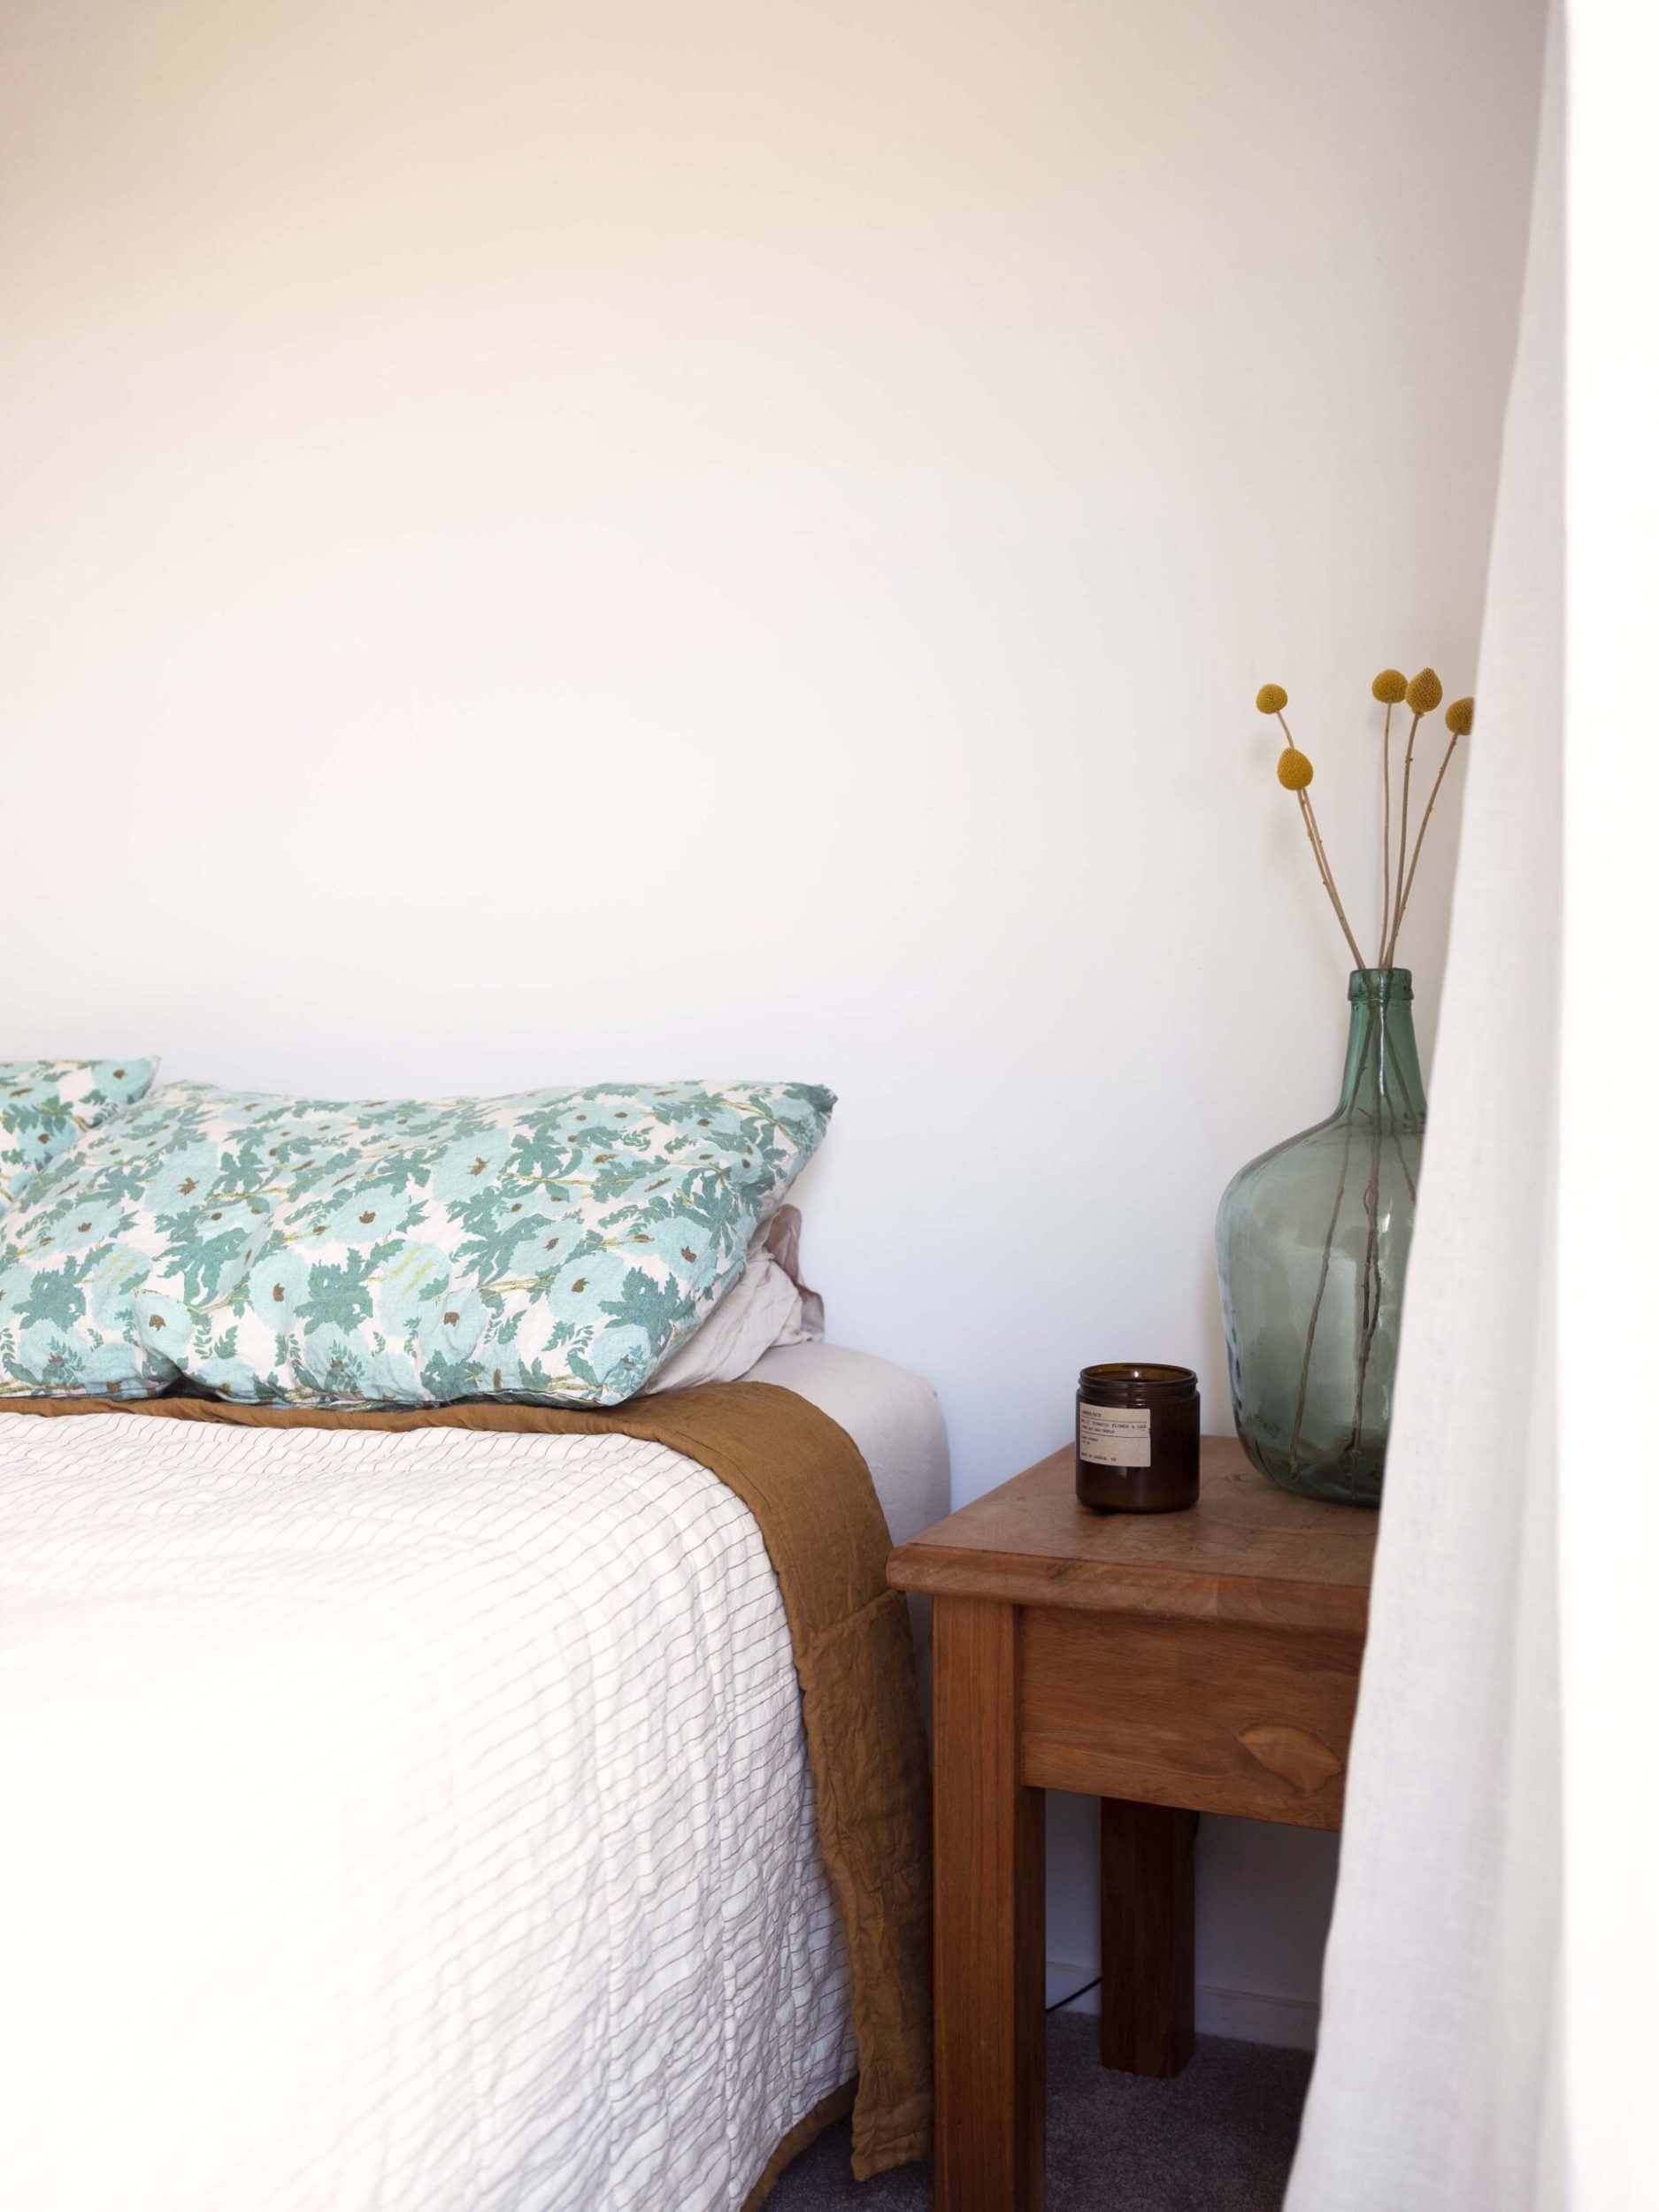 Bed with blue flower pattern pillows with large green glass bottle on bedside table